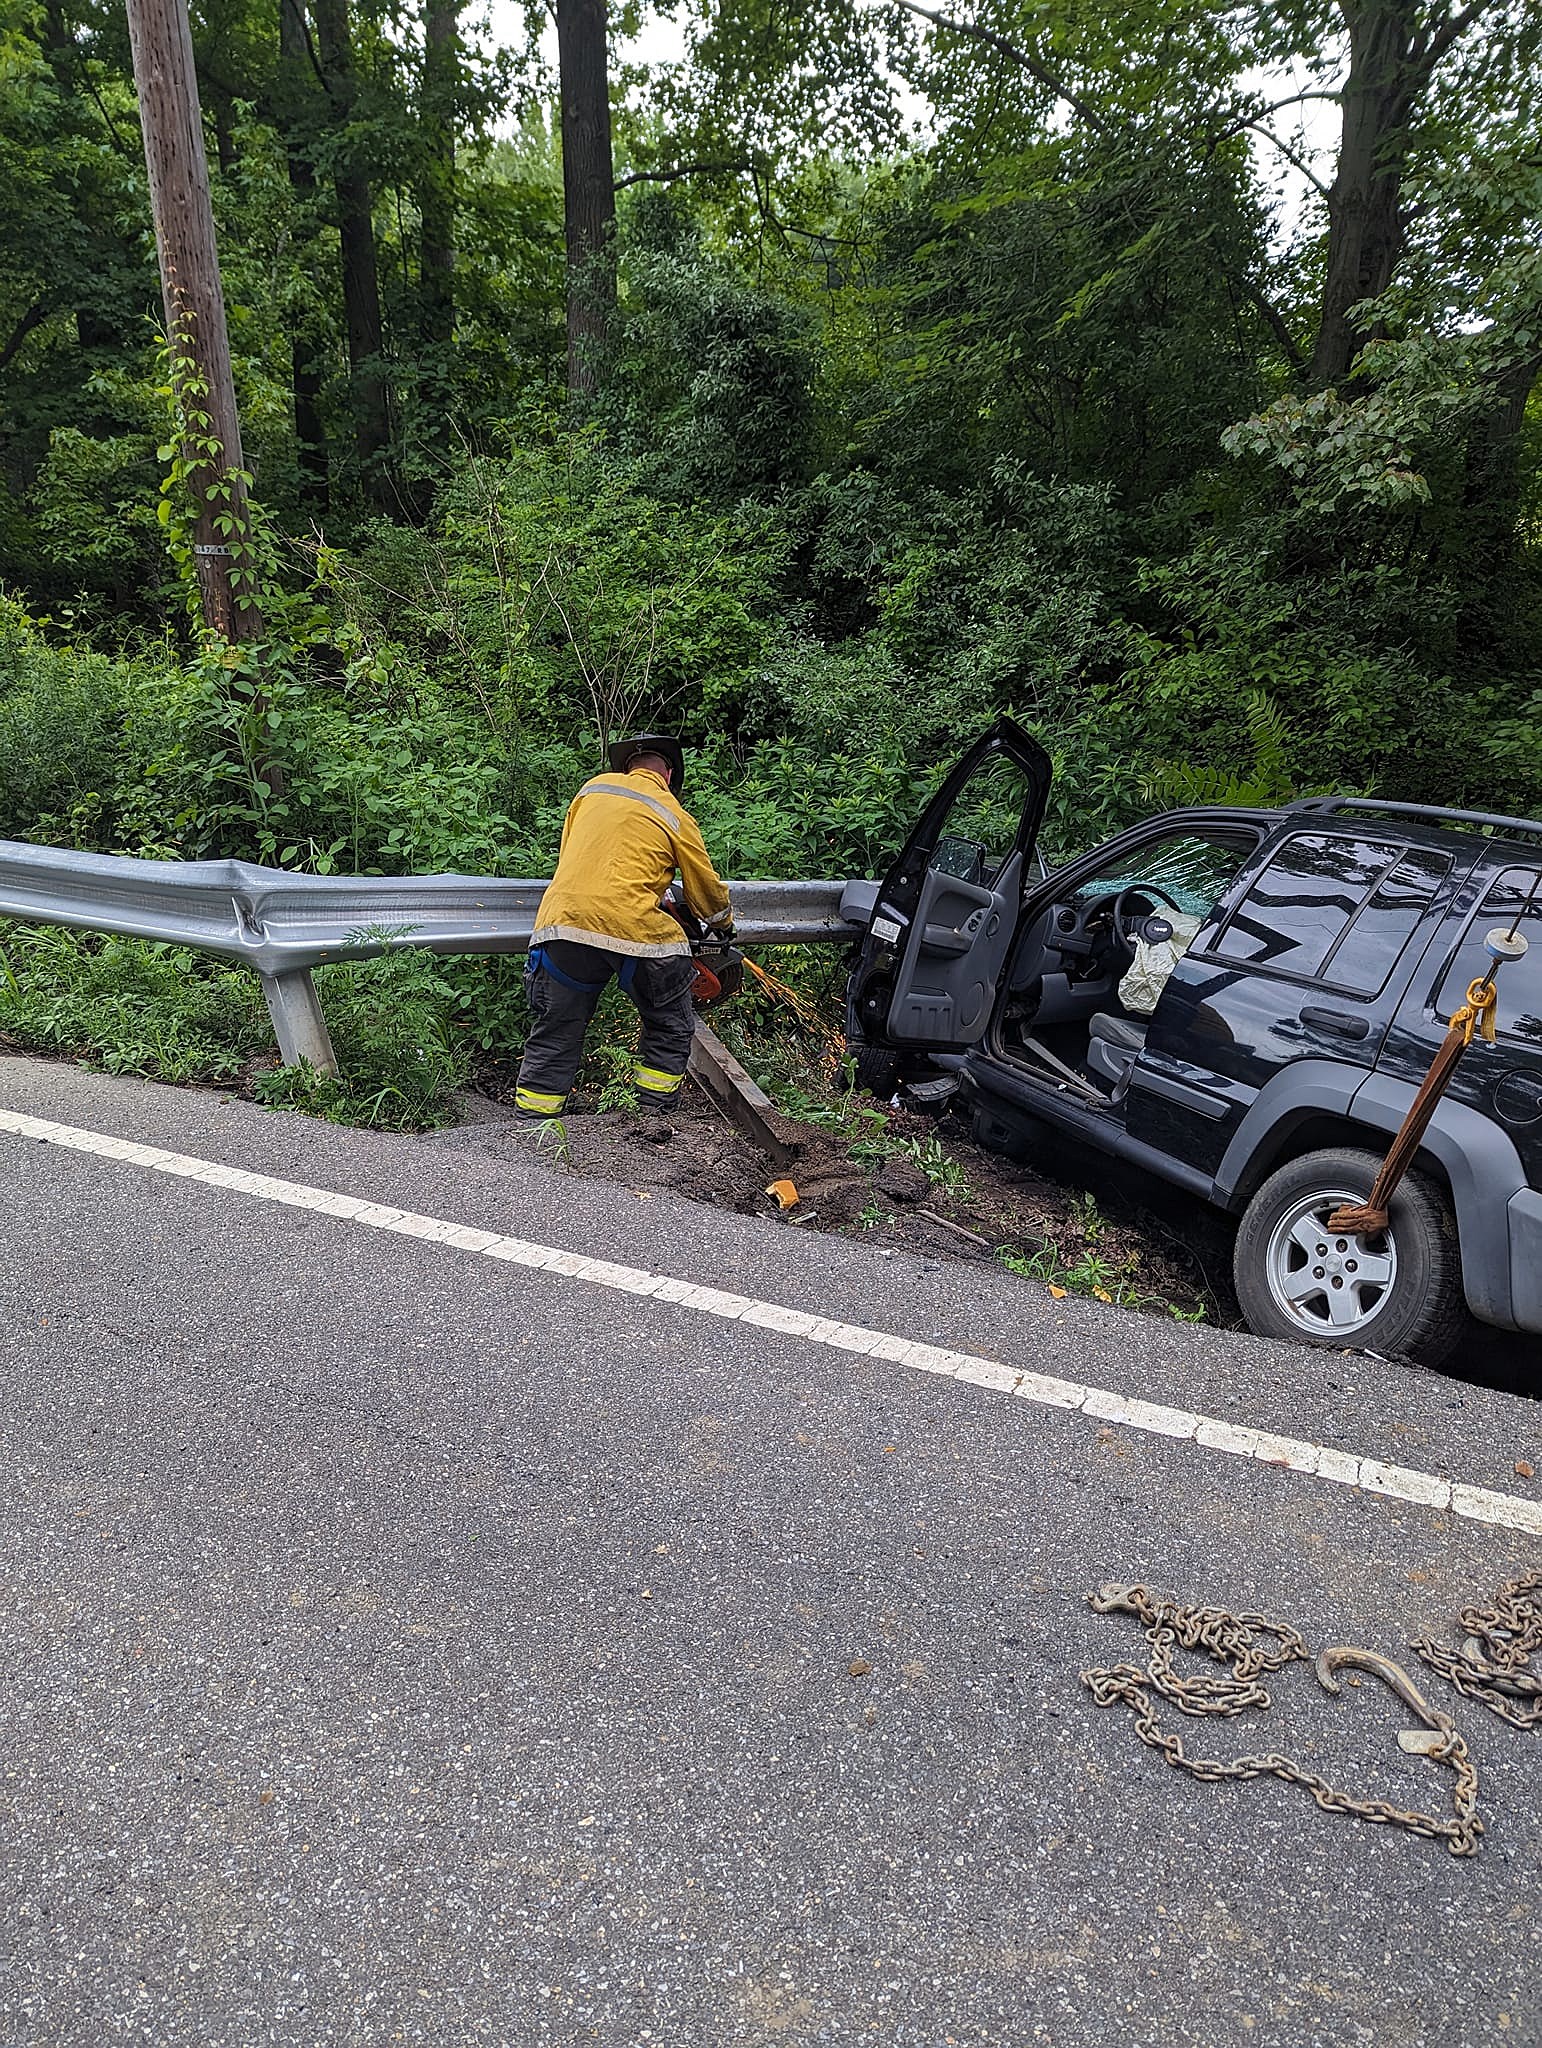 Members of the Millstone Fire Department responded to an accident in Roosevelt, NJ, where a guardrail was impaled through an SUV. Photo: Millstone Township Fire Department via Facebook